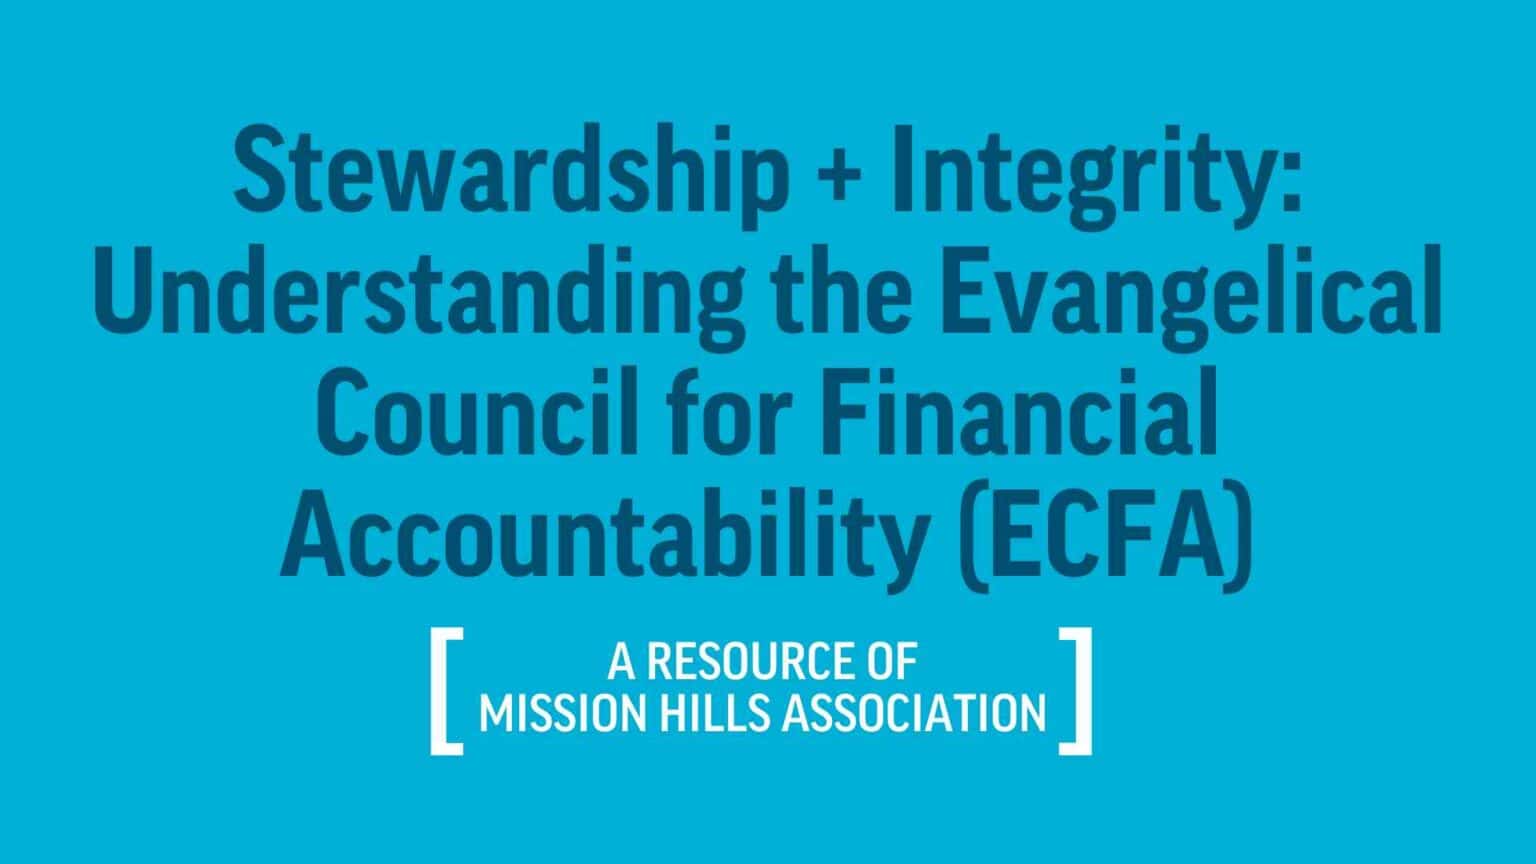 Stewardship + Integrity: Understanding the Evangelical Council for Financial Accountability (ECFA)